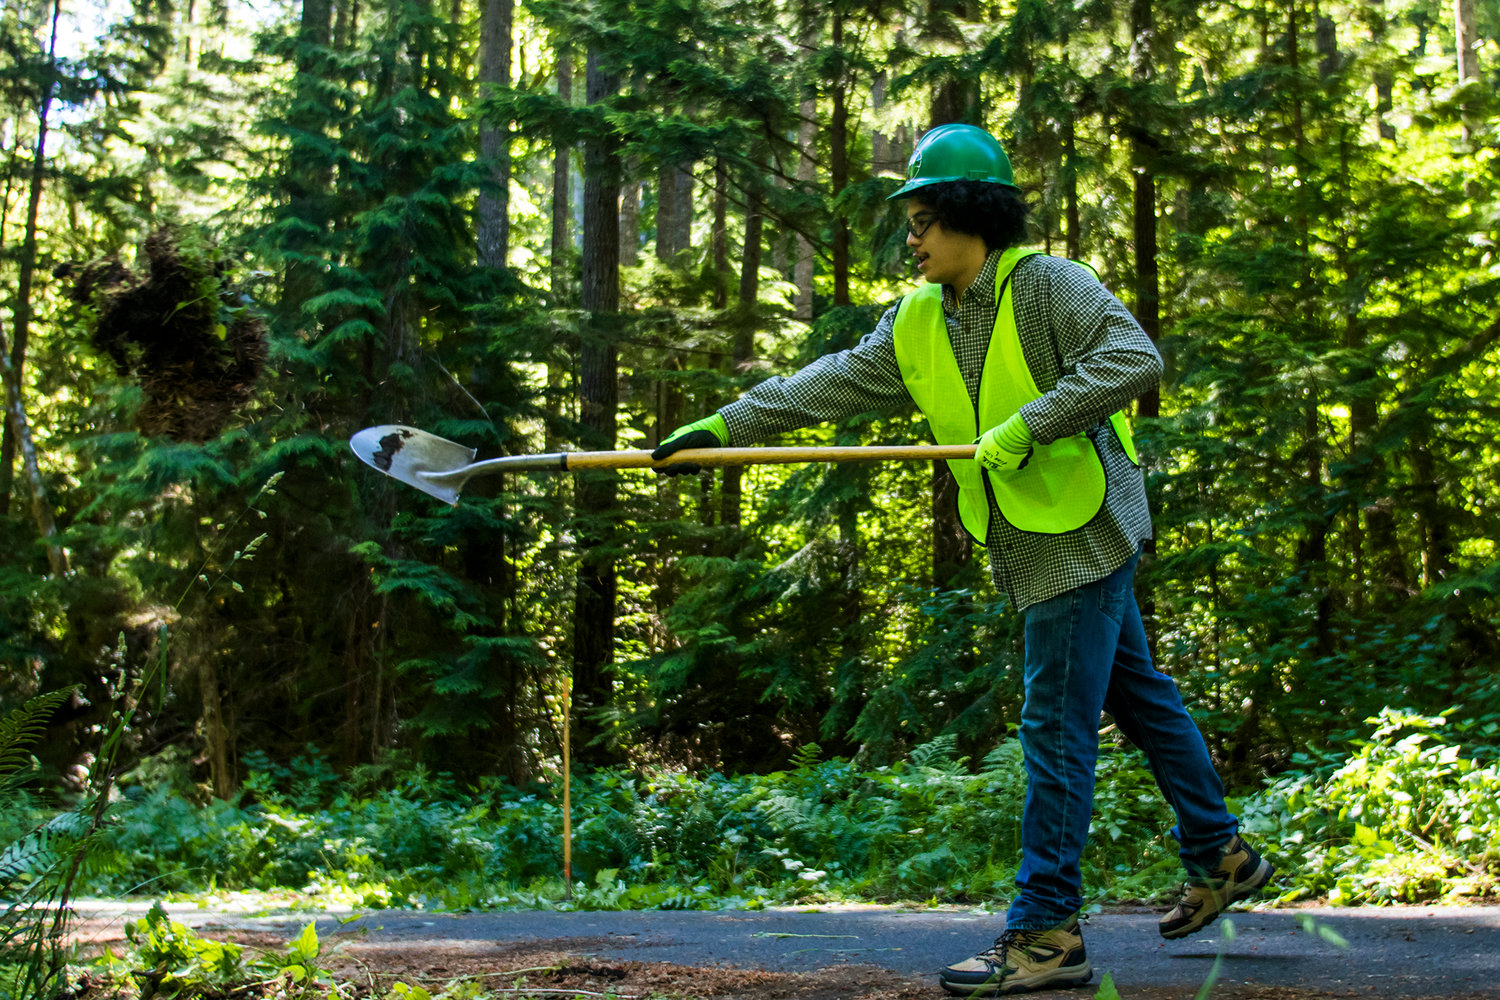 Adam Mommer, a senior at White Pass High School, uses a shovel to move natural materials away from Forest Road 77 Wednesday afternoon in the Gifford Pinchot National Forest.